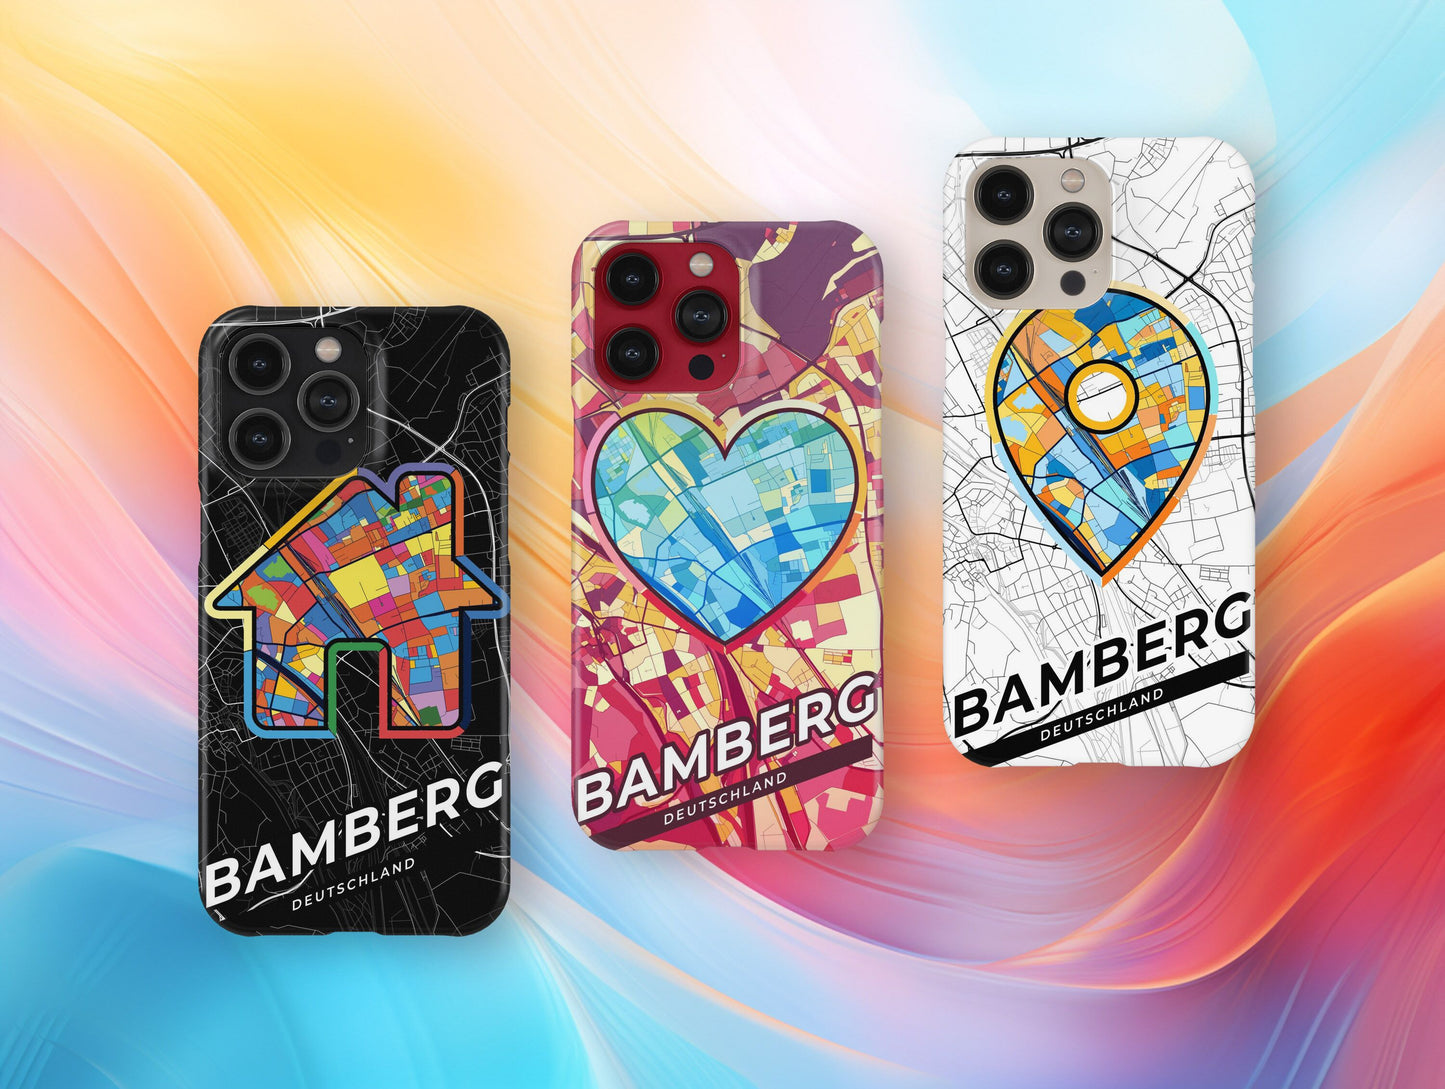 Bamberg Deutschland slim phone case with colorful icon. Birthday, wedding or housewarming gift. Couple match cases.